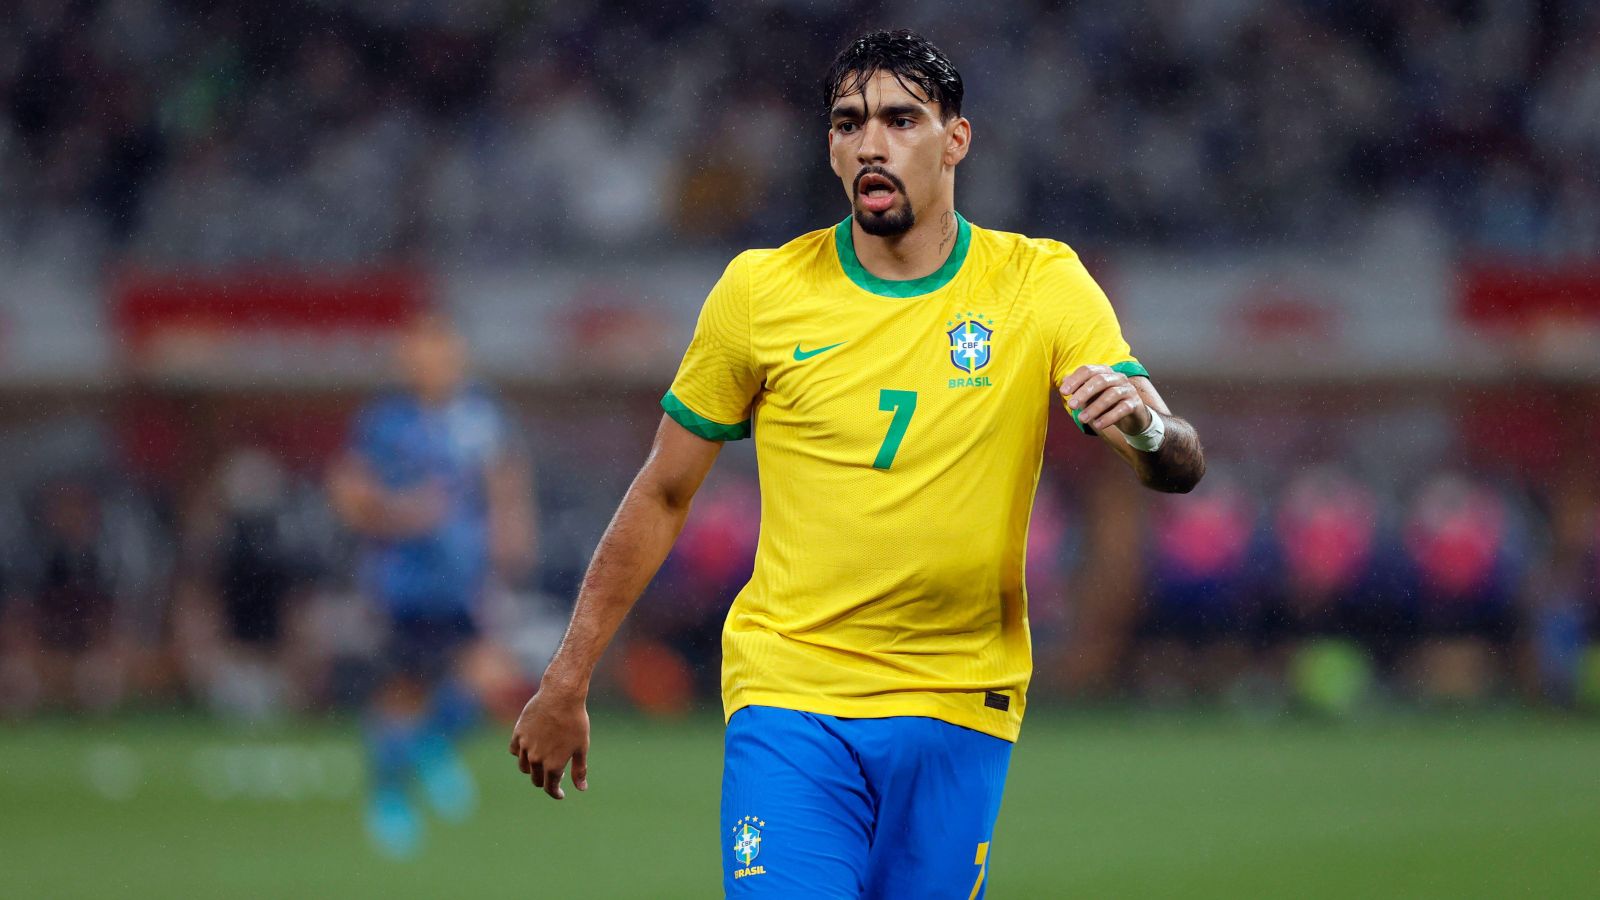 Arsenal 'pushing very hard' to seal £42m deal for Brazilian after he 'vetoed' other transfers